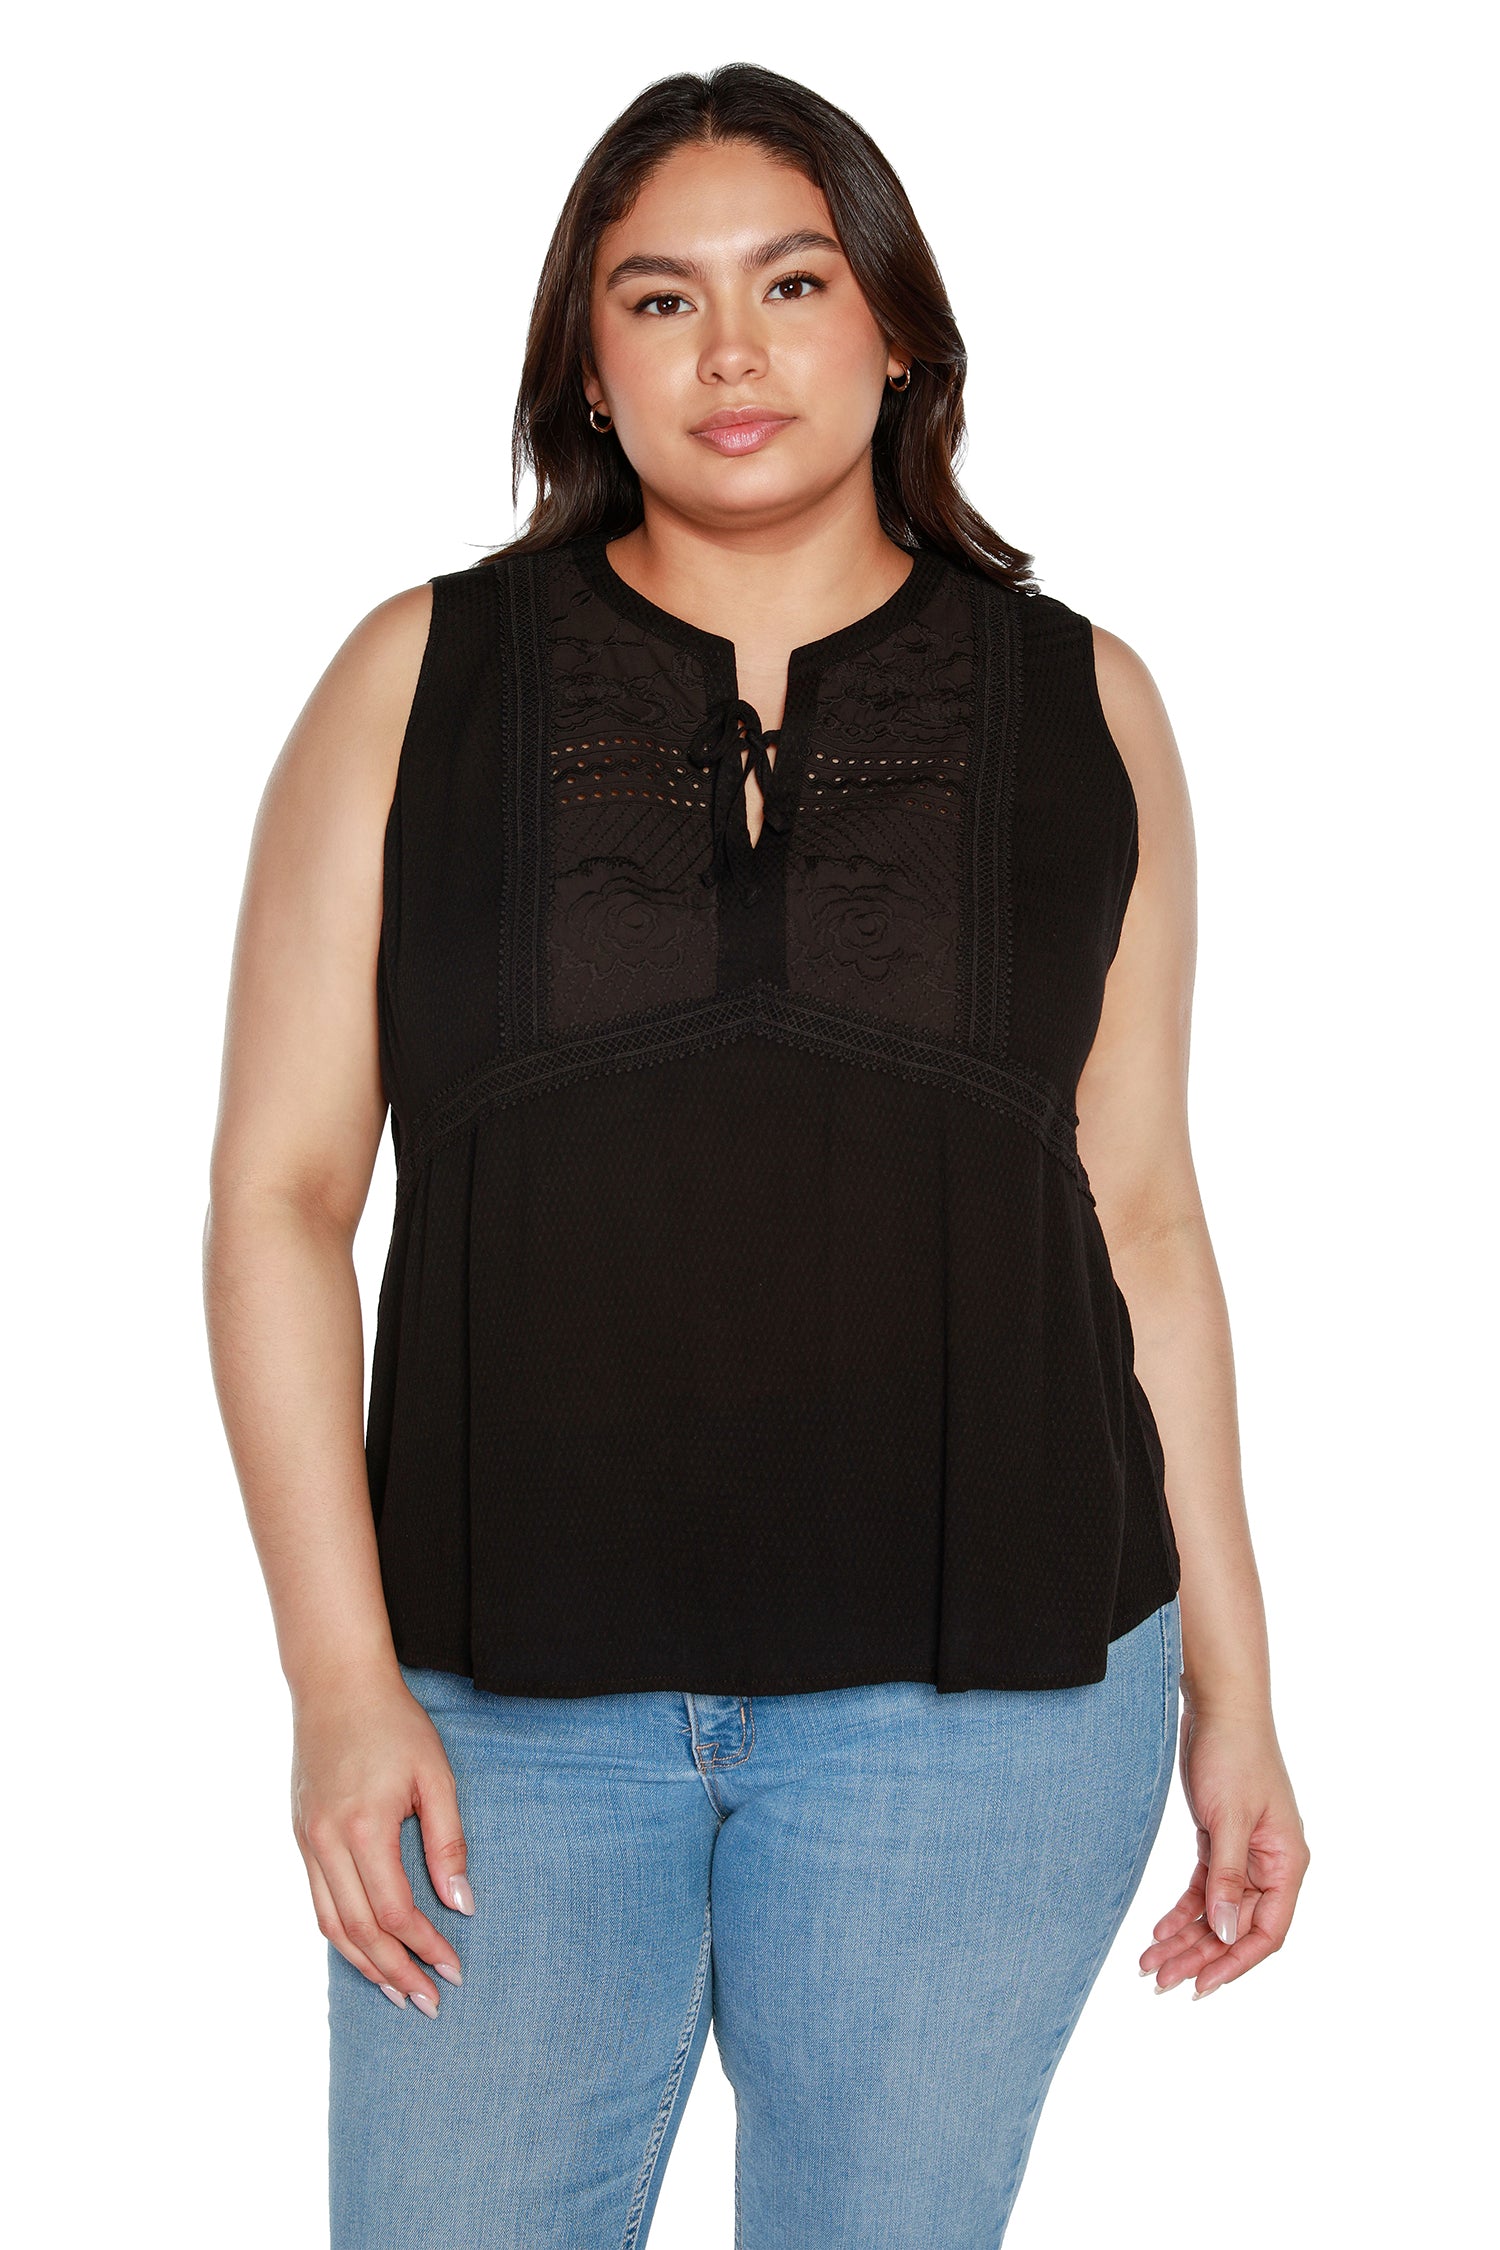 Women’s Sleeveless Woven Top with Eyelet Lace and Embroidery | Curvy